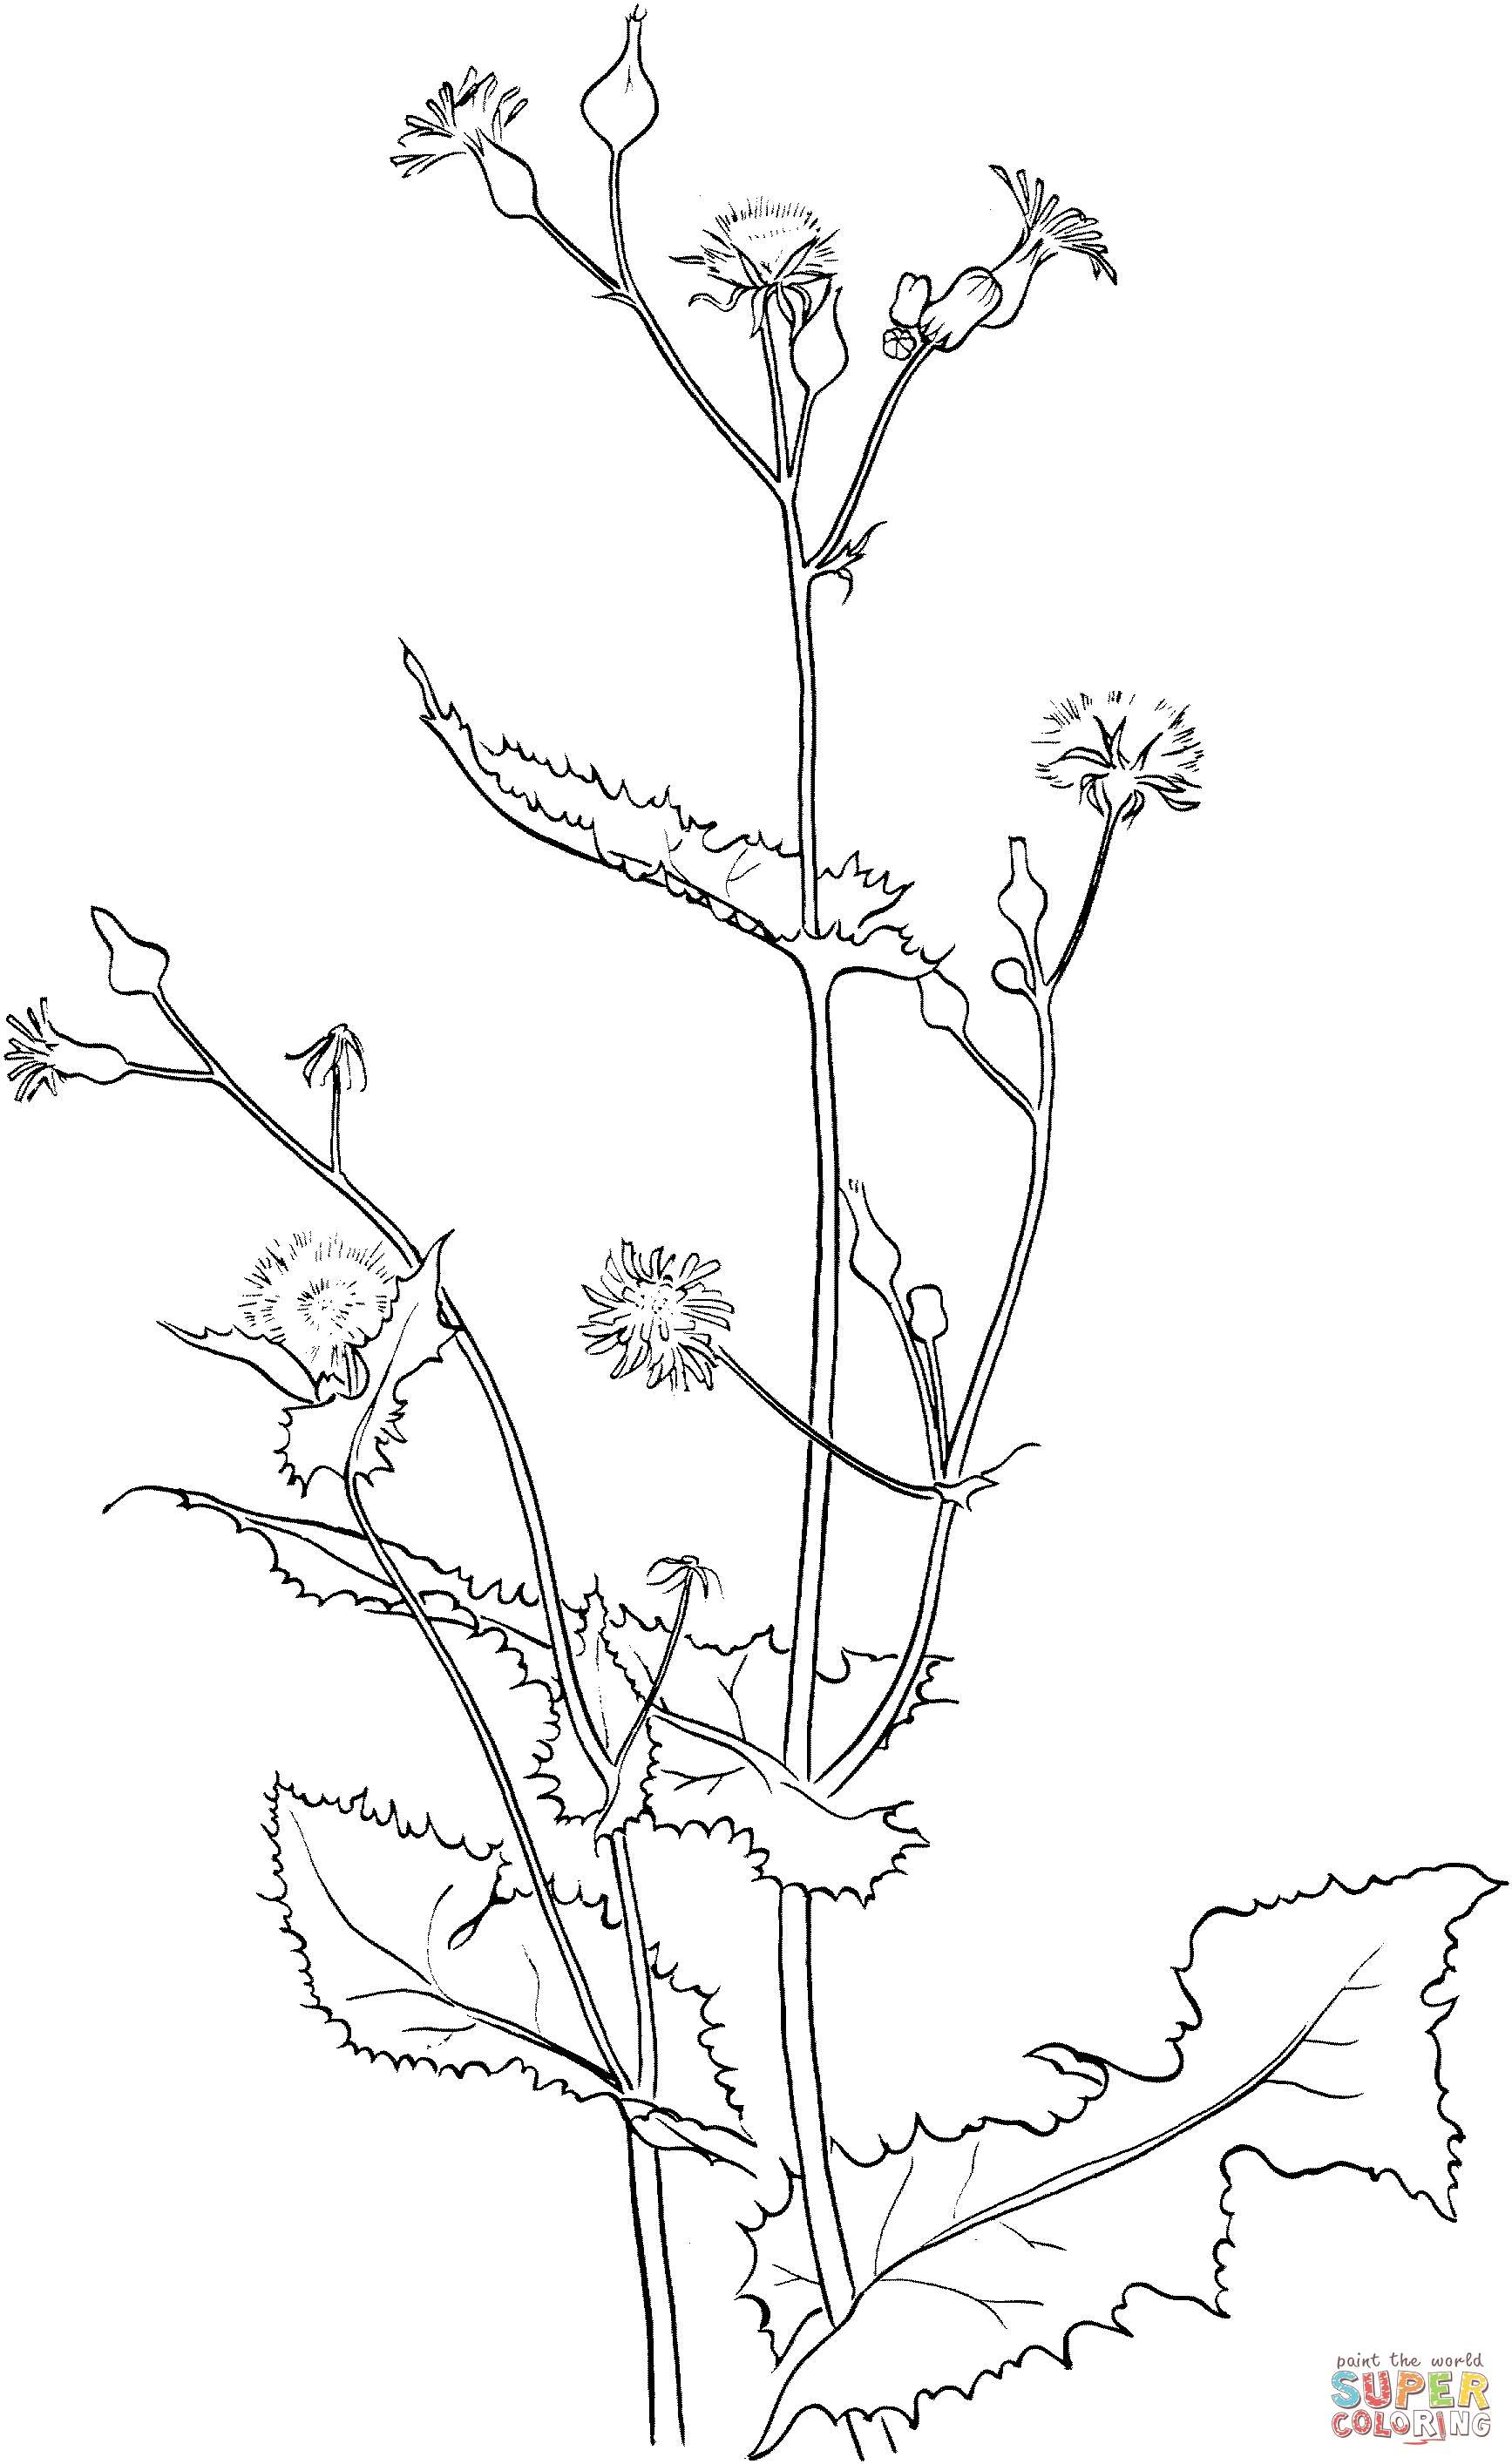 Smooth Sow Thistle Coloring Page